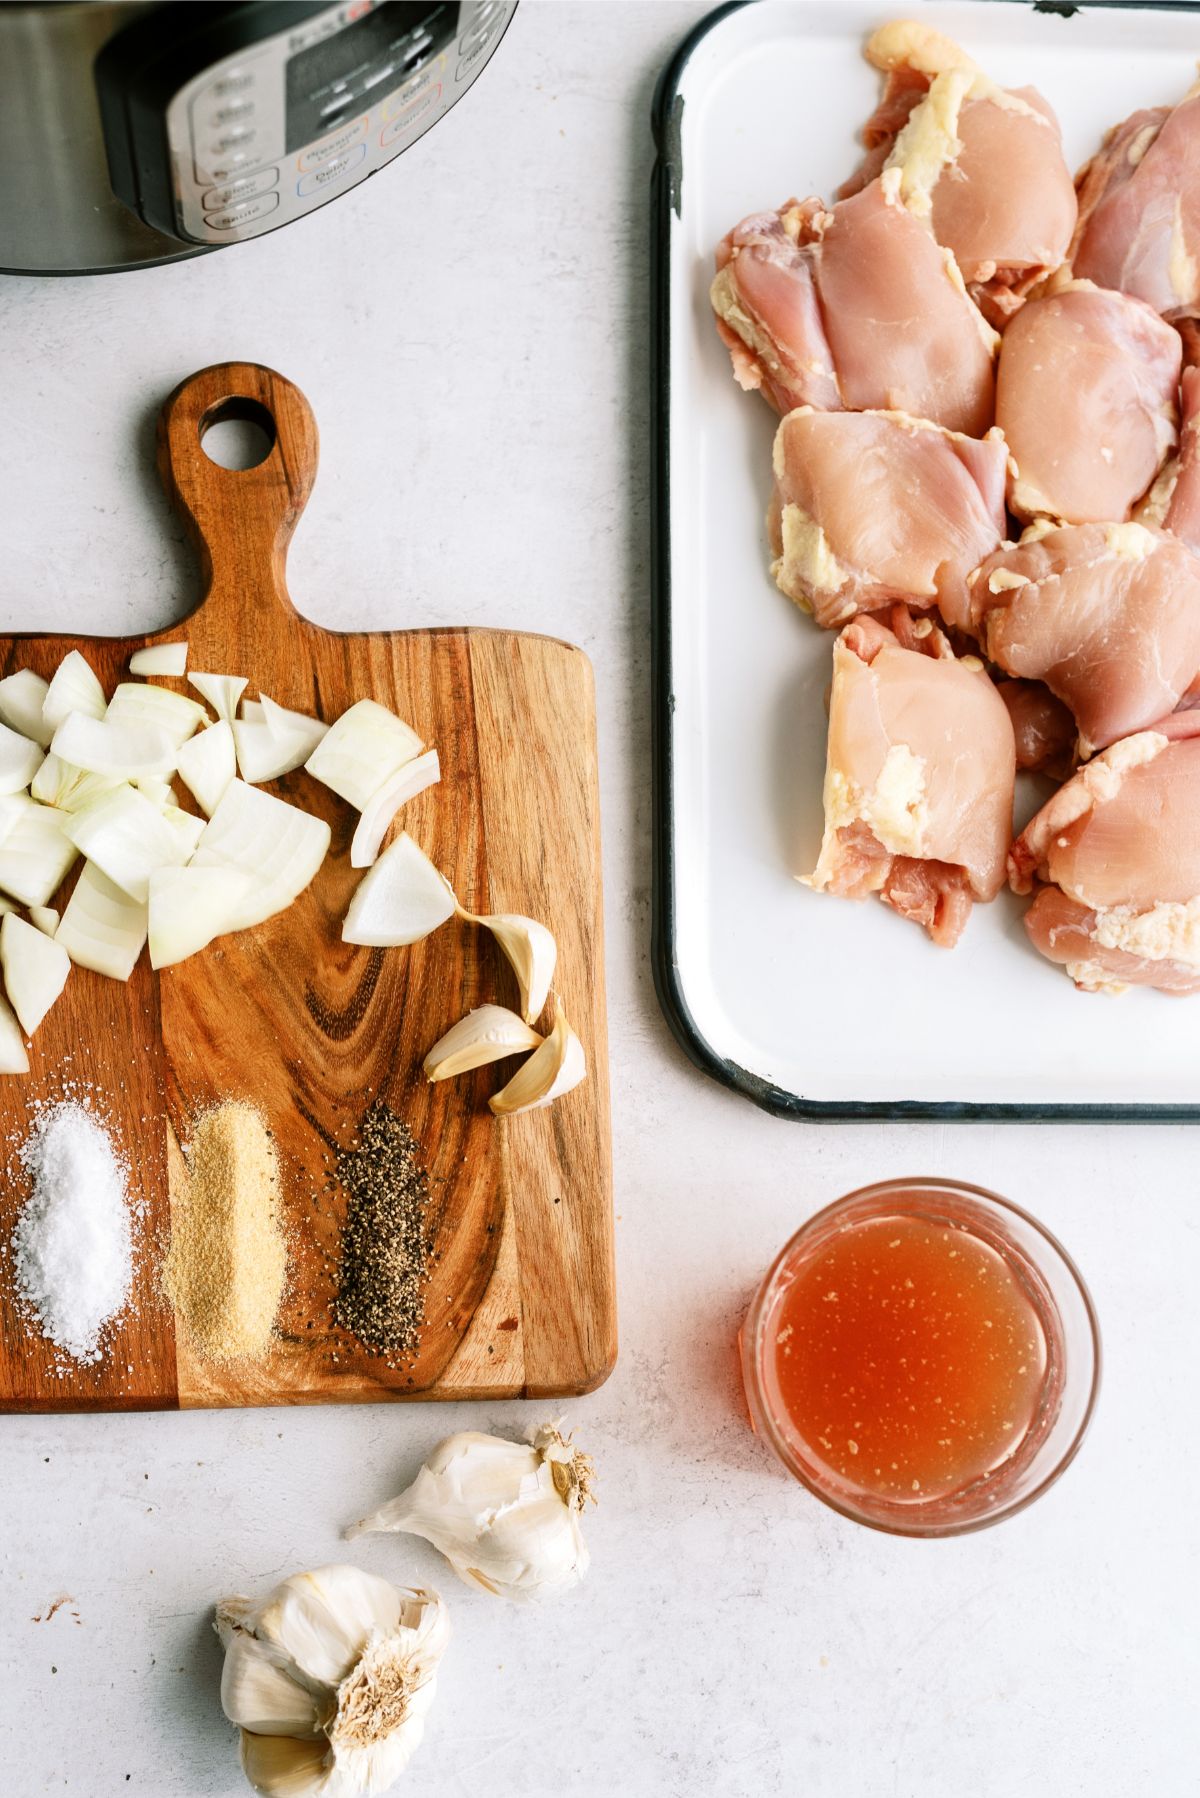 Ingredients needed for Instant Pot Chicken Thighs with Lemon Pepper Glaze